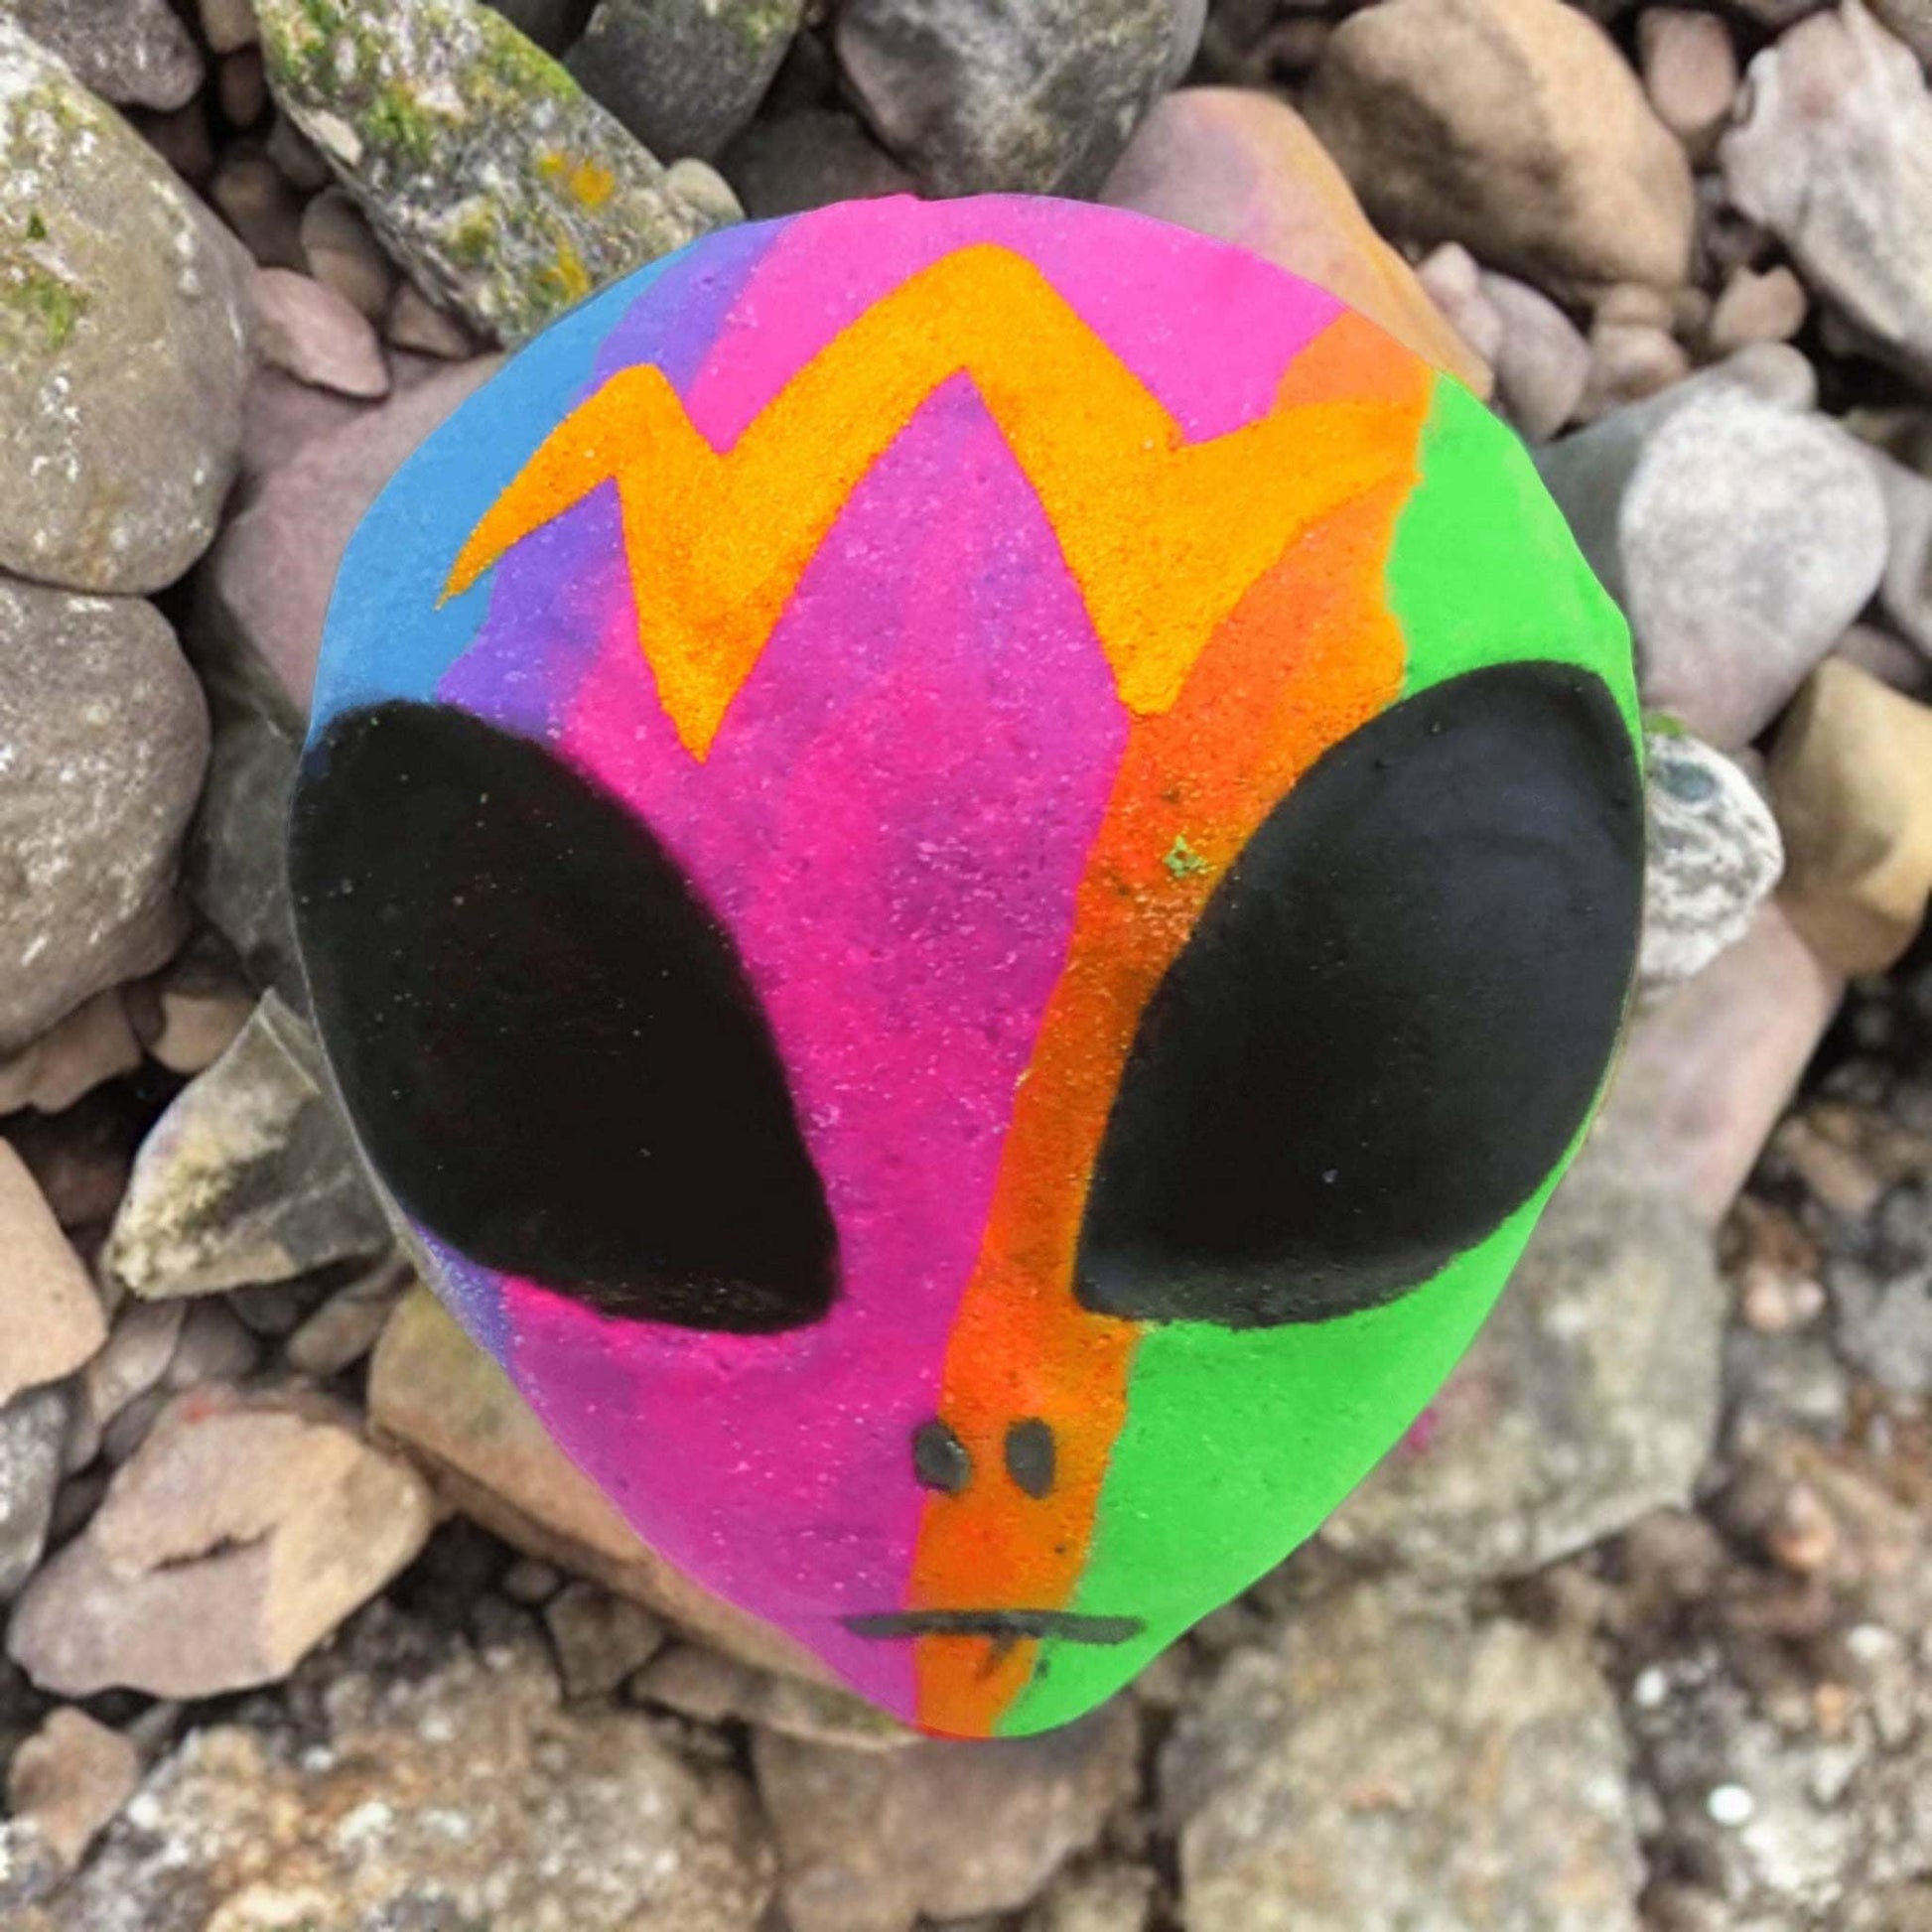 Get ready for a space adventure with the Starman Alien Fizzy Bath Bomb! Dive into an out-of-this-world bath experience.